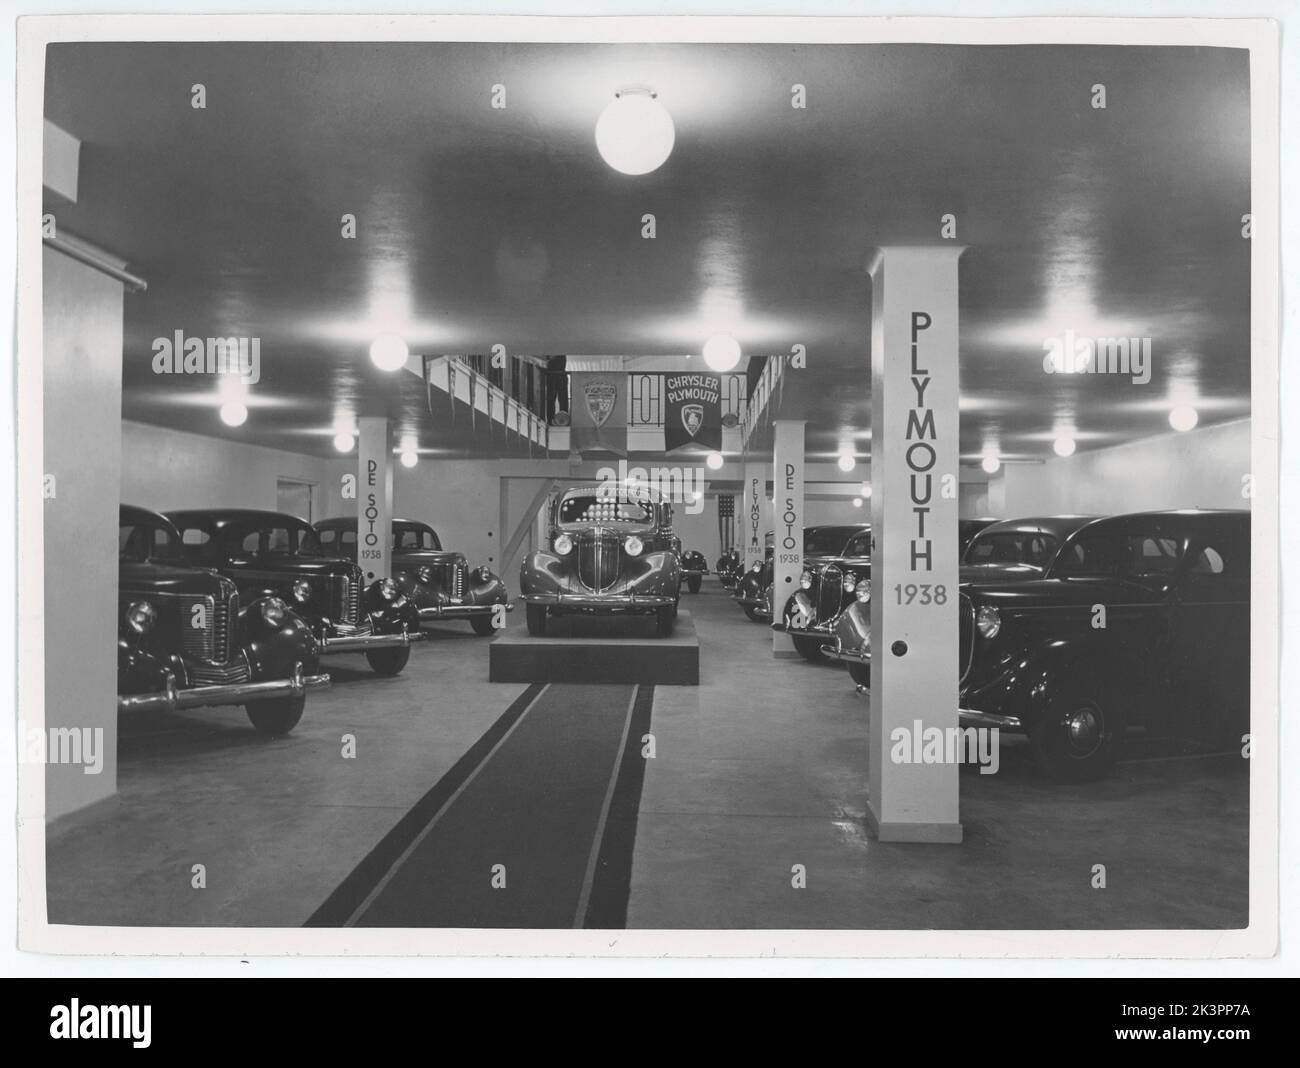 1930s new cars for sale. The swedish representative for General Motors have the brand new car models on display in their showroom. Plymouth, Chystler and De Soto. Sweden 1938 Stock Photo